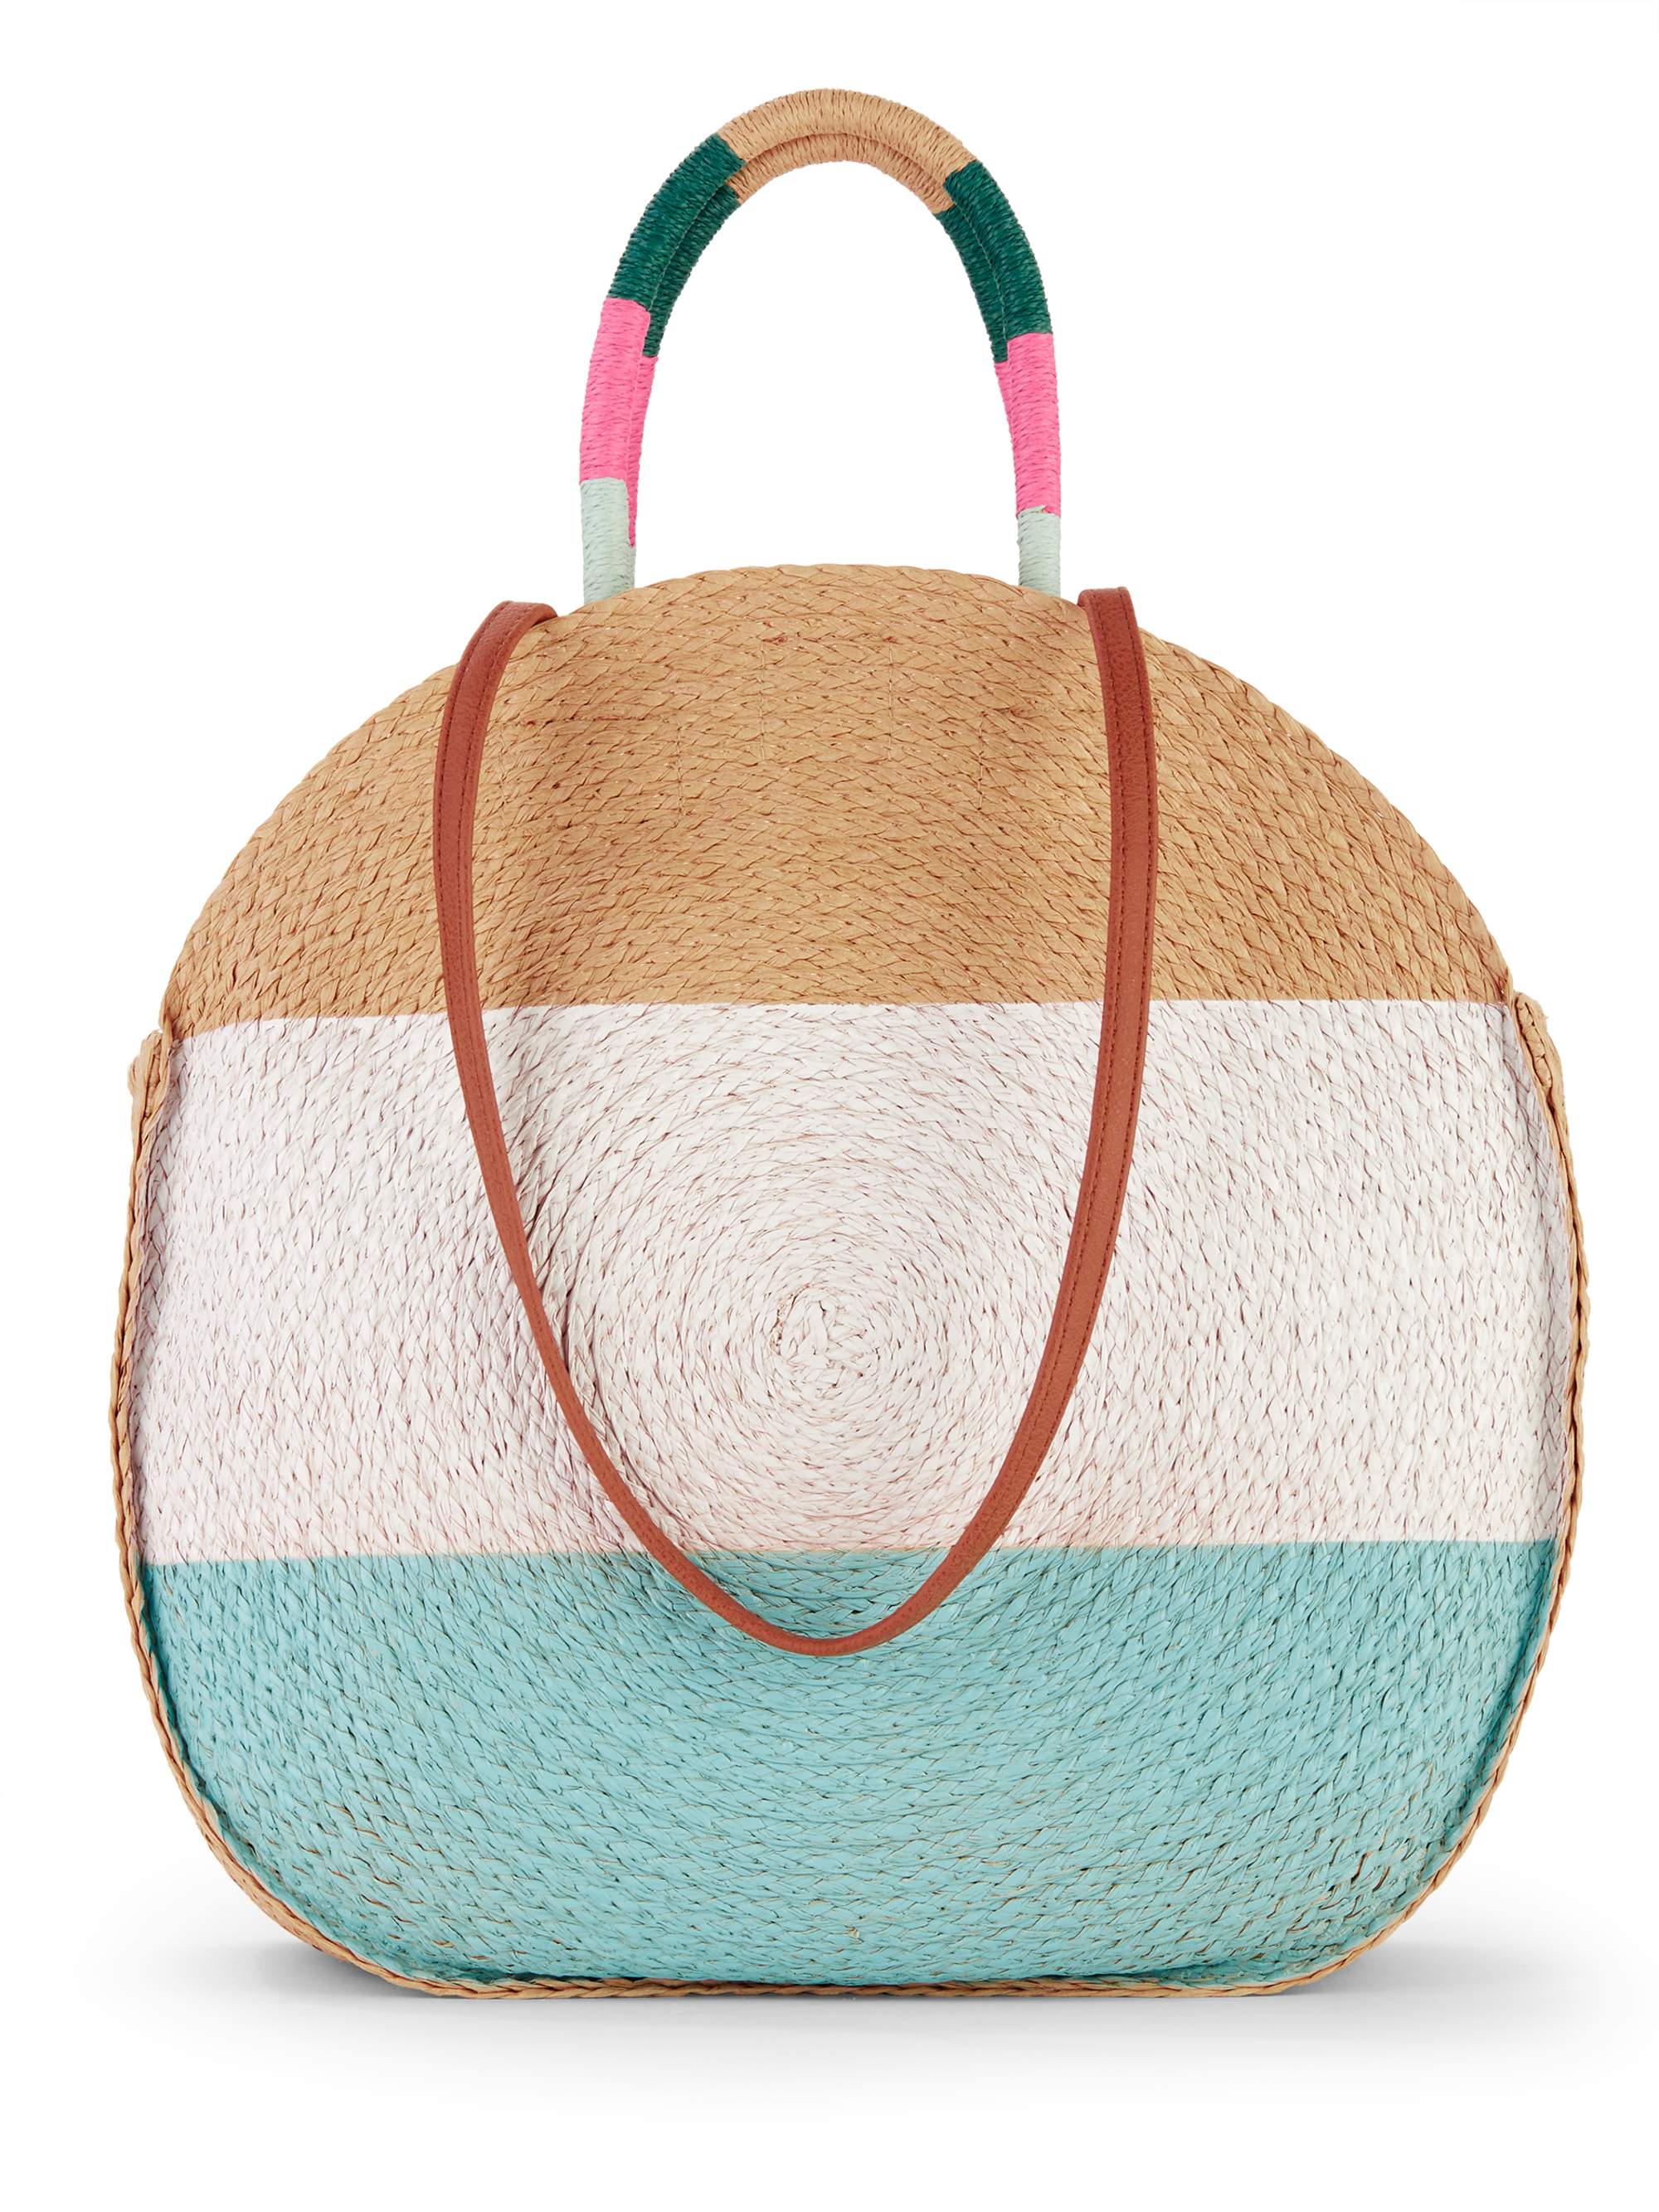 Time and Tru Women's Striped Straw Circle Tote Bag with Inner Slip Pocket Mint Multi - image 1 of 6